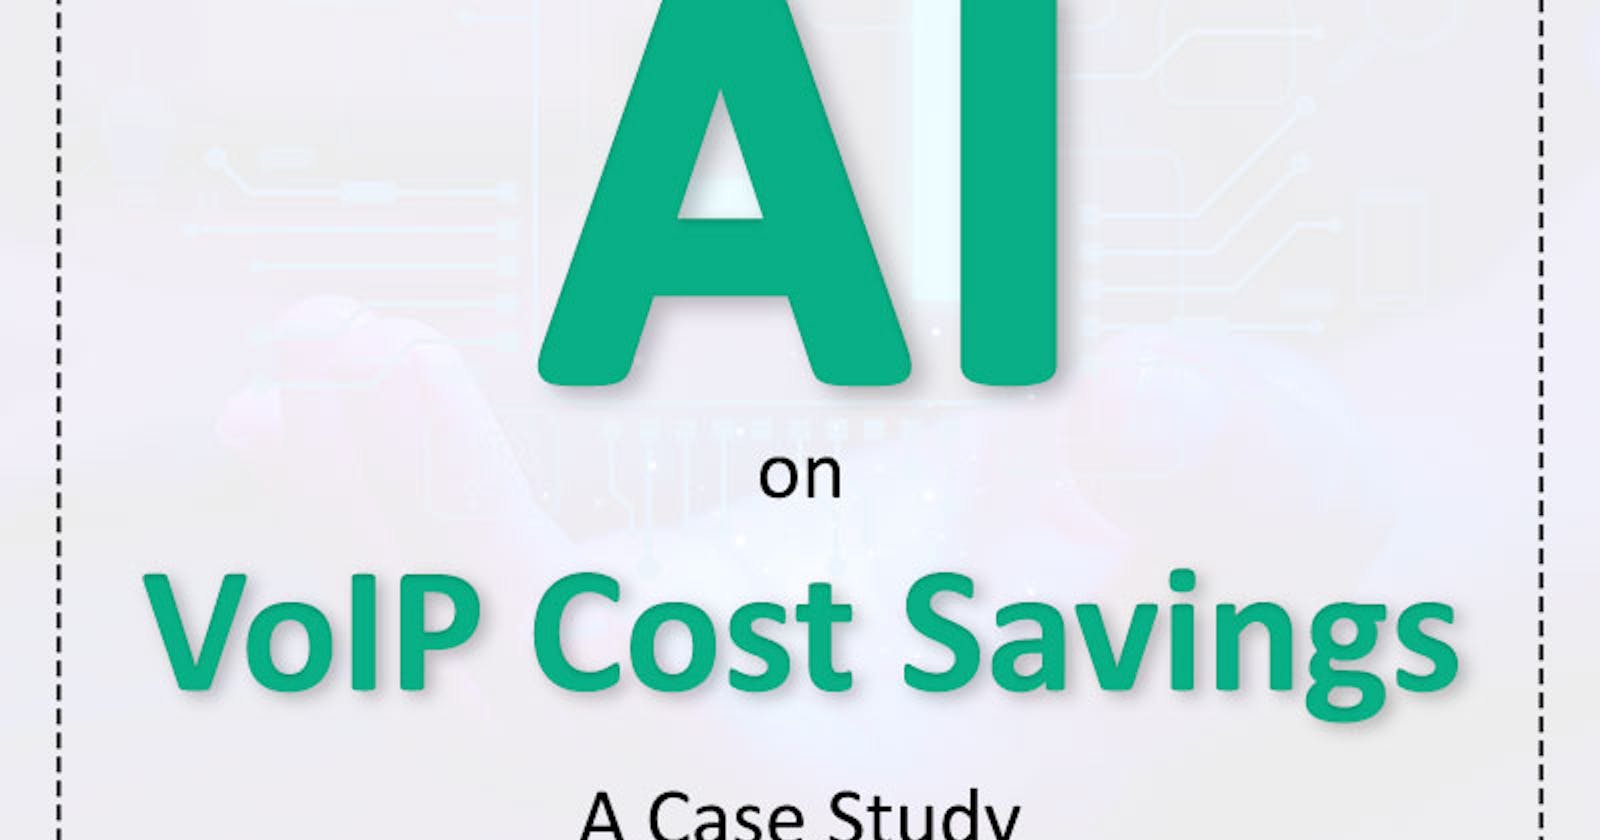 The Impact of AI on VoIP Cost Savings: A Case Study